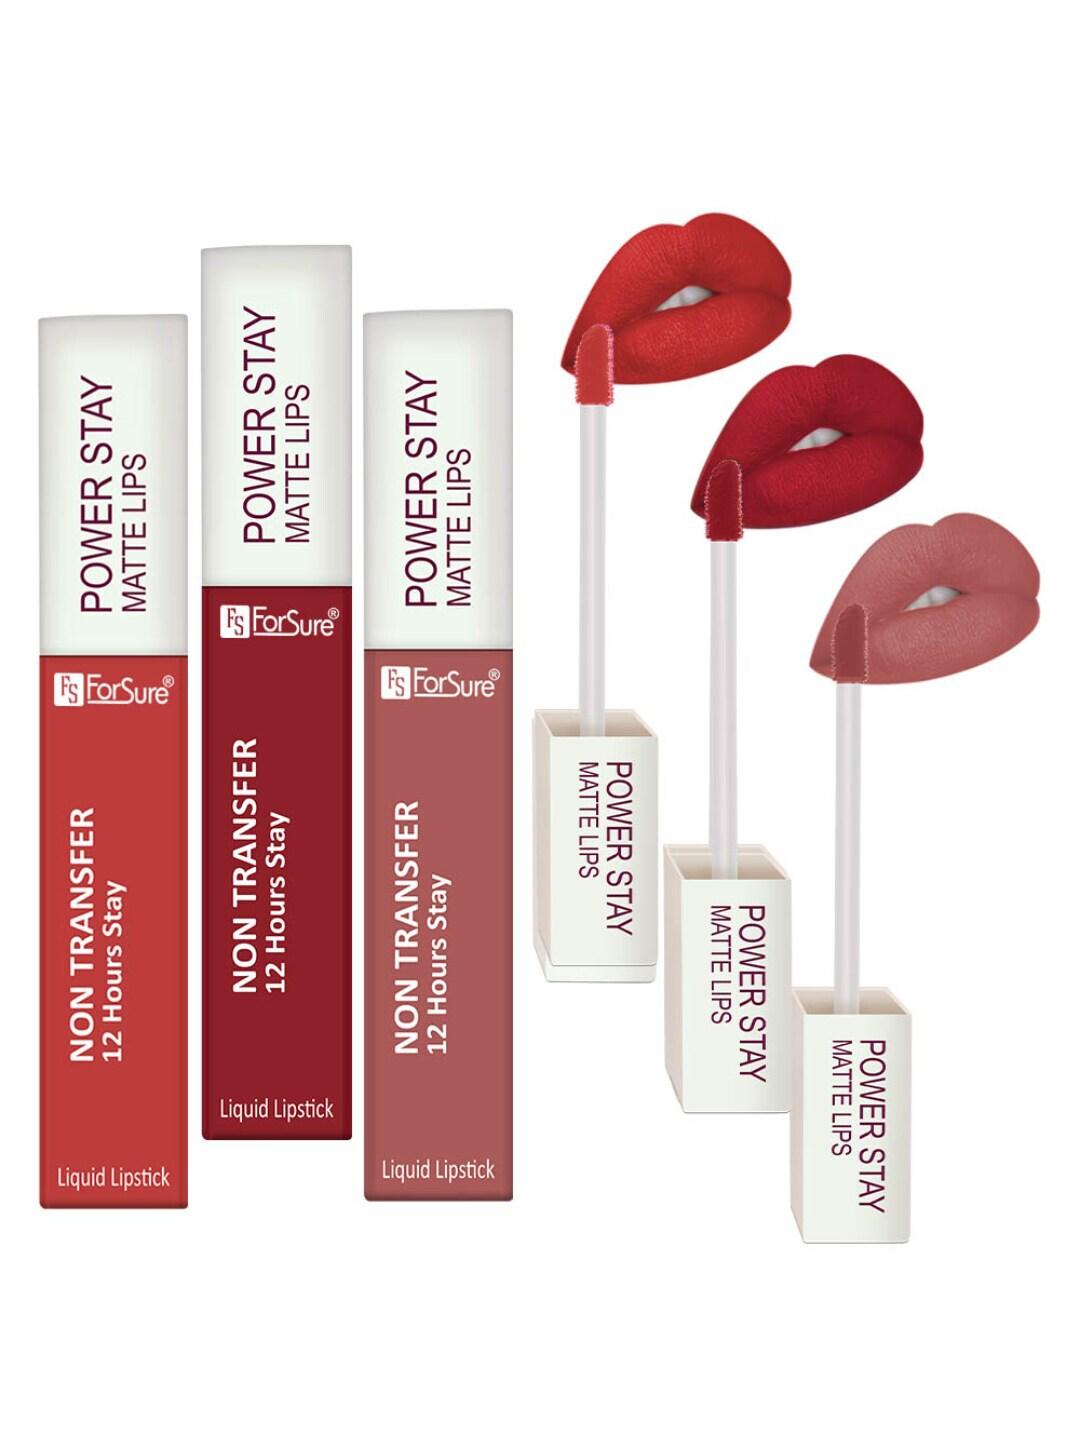 ForSure Power Stay Set Of 3 Lipsticks 4ml Each-Carmel Nude 21+Iconic Red 22+Rose Red 01